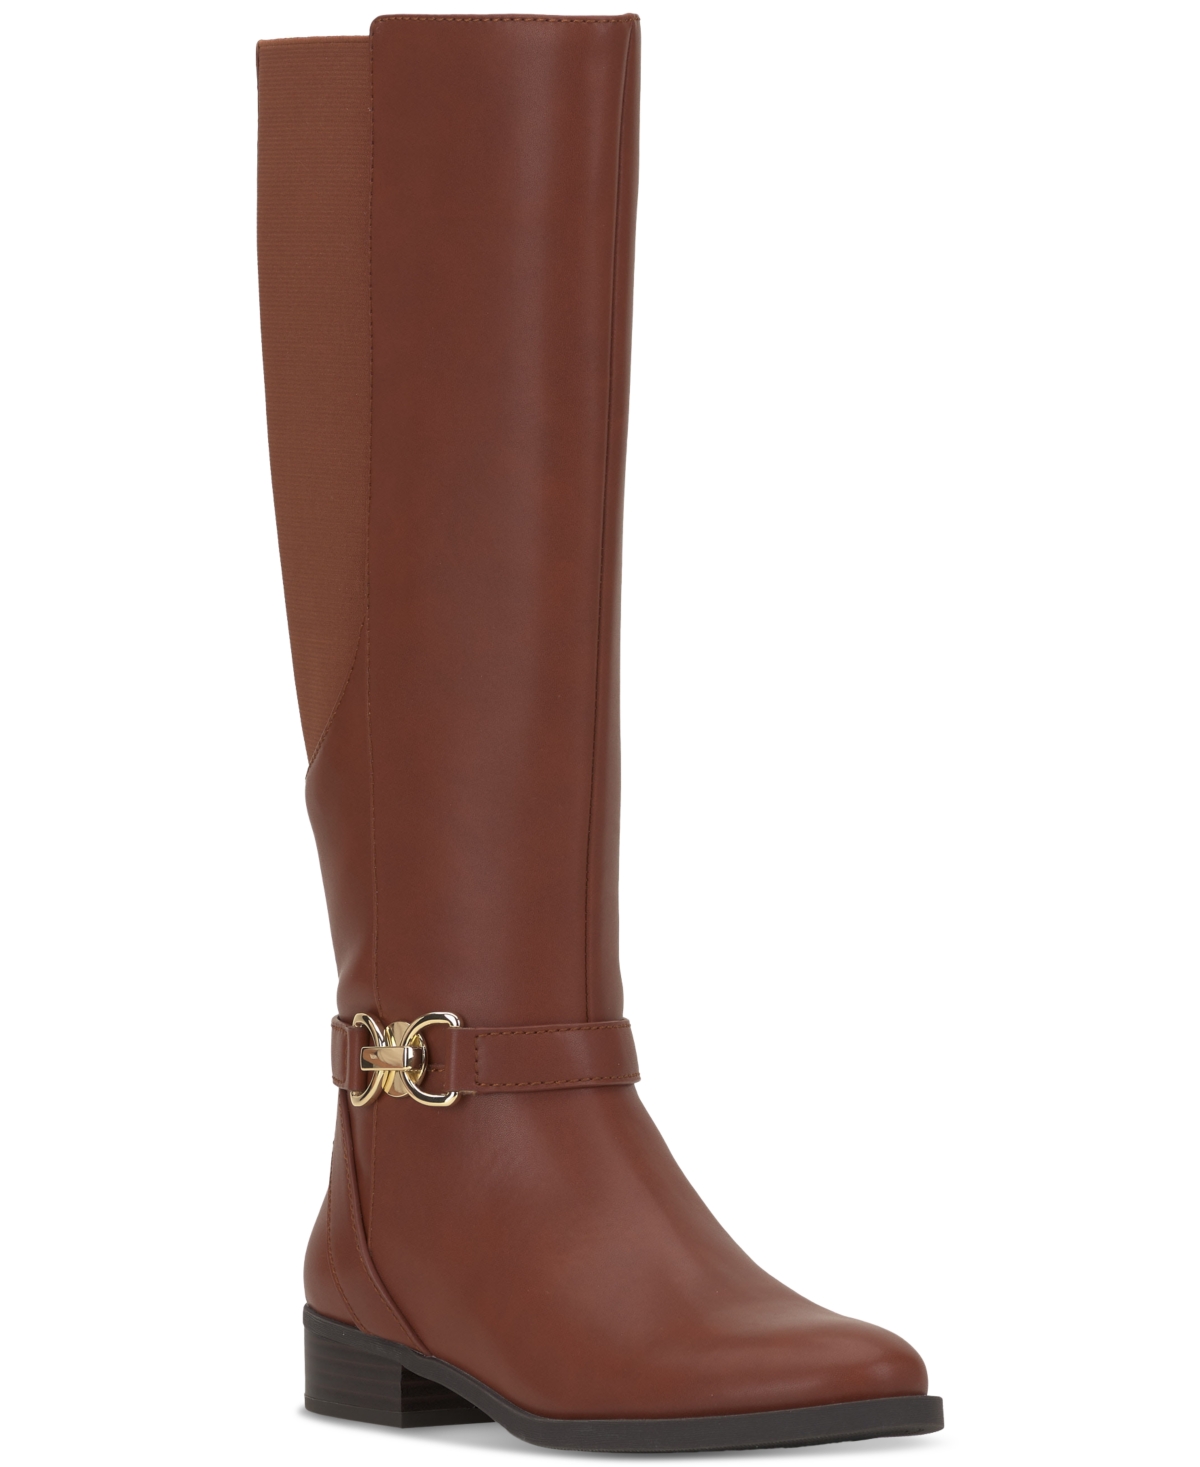 Women's Faron Knee High Riding Boots, Created for Macy's - Cognac Smooth